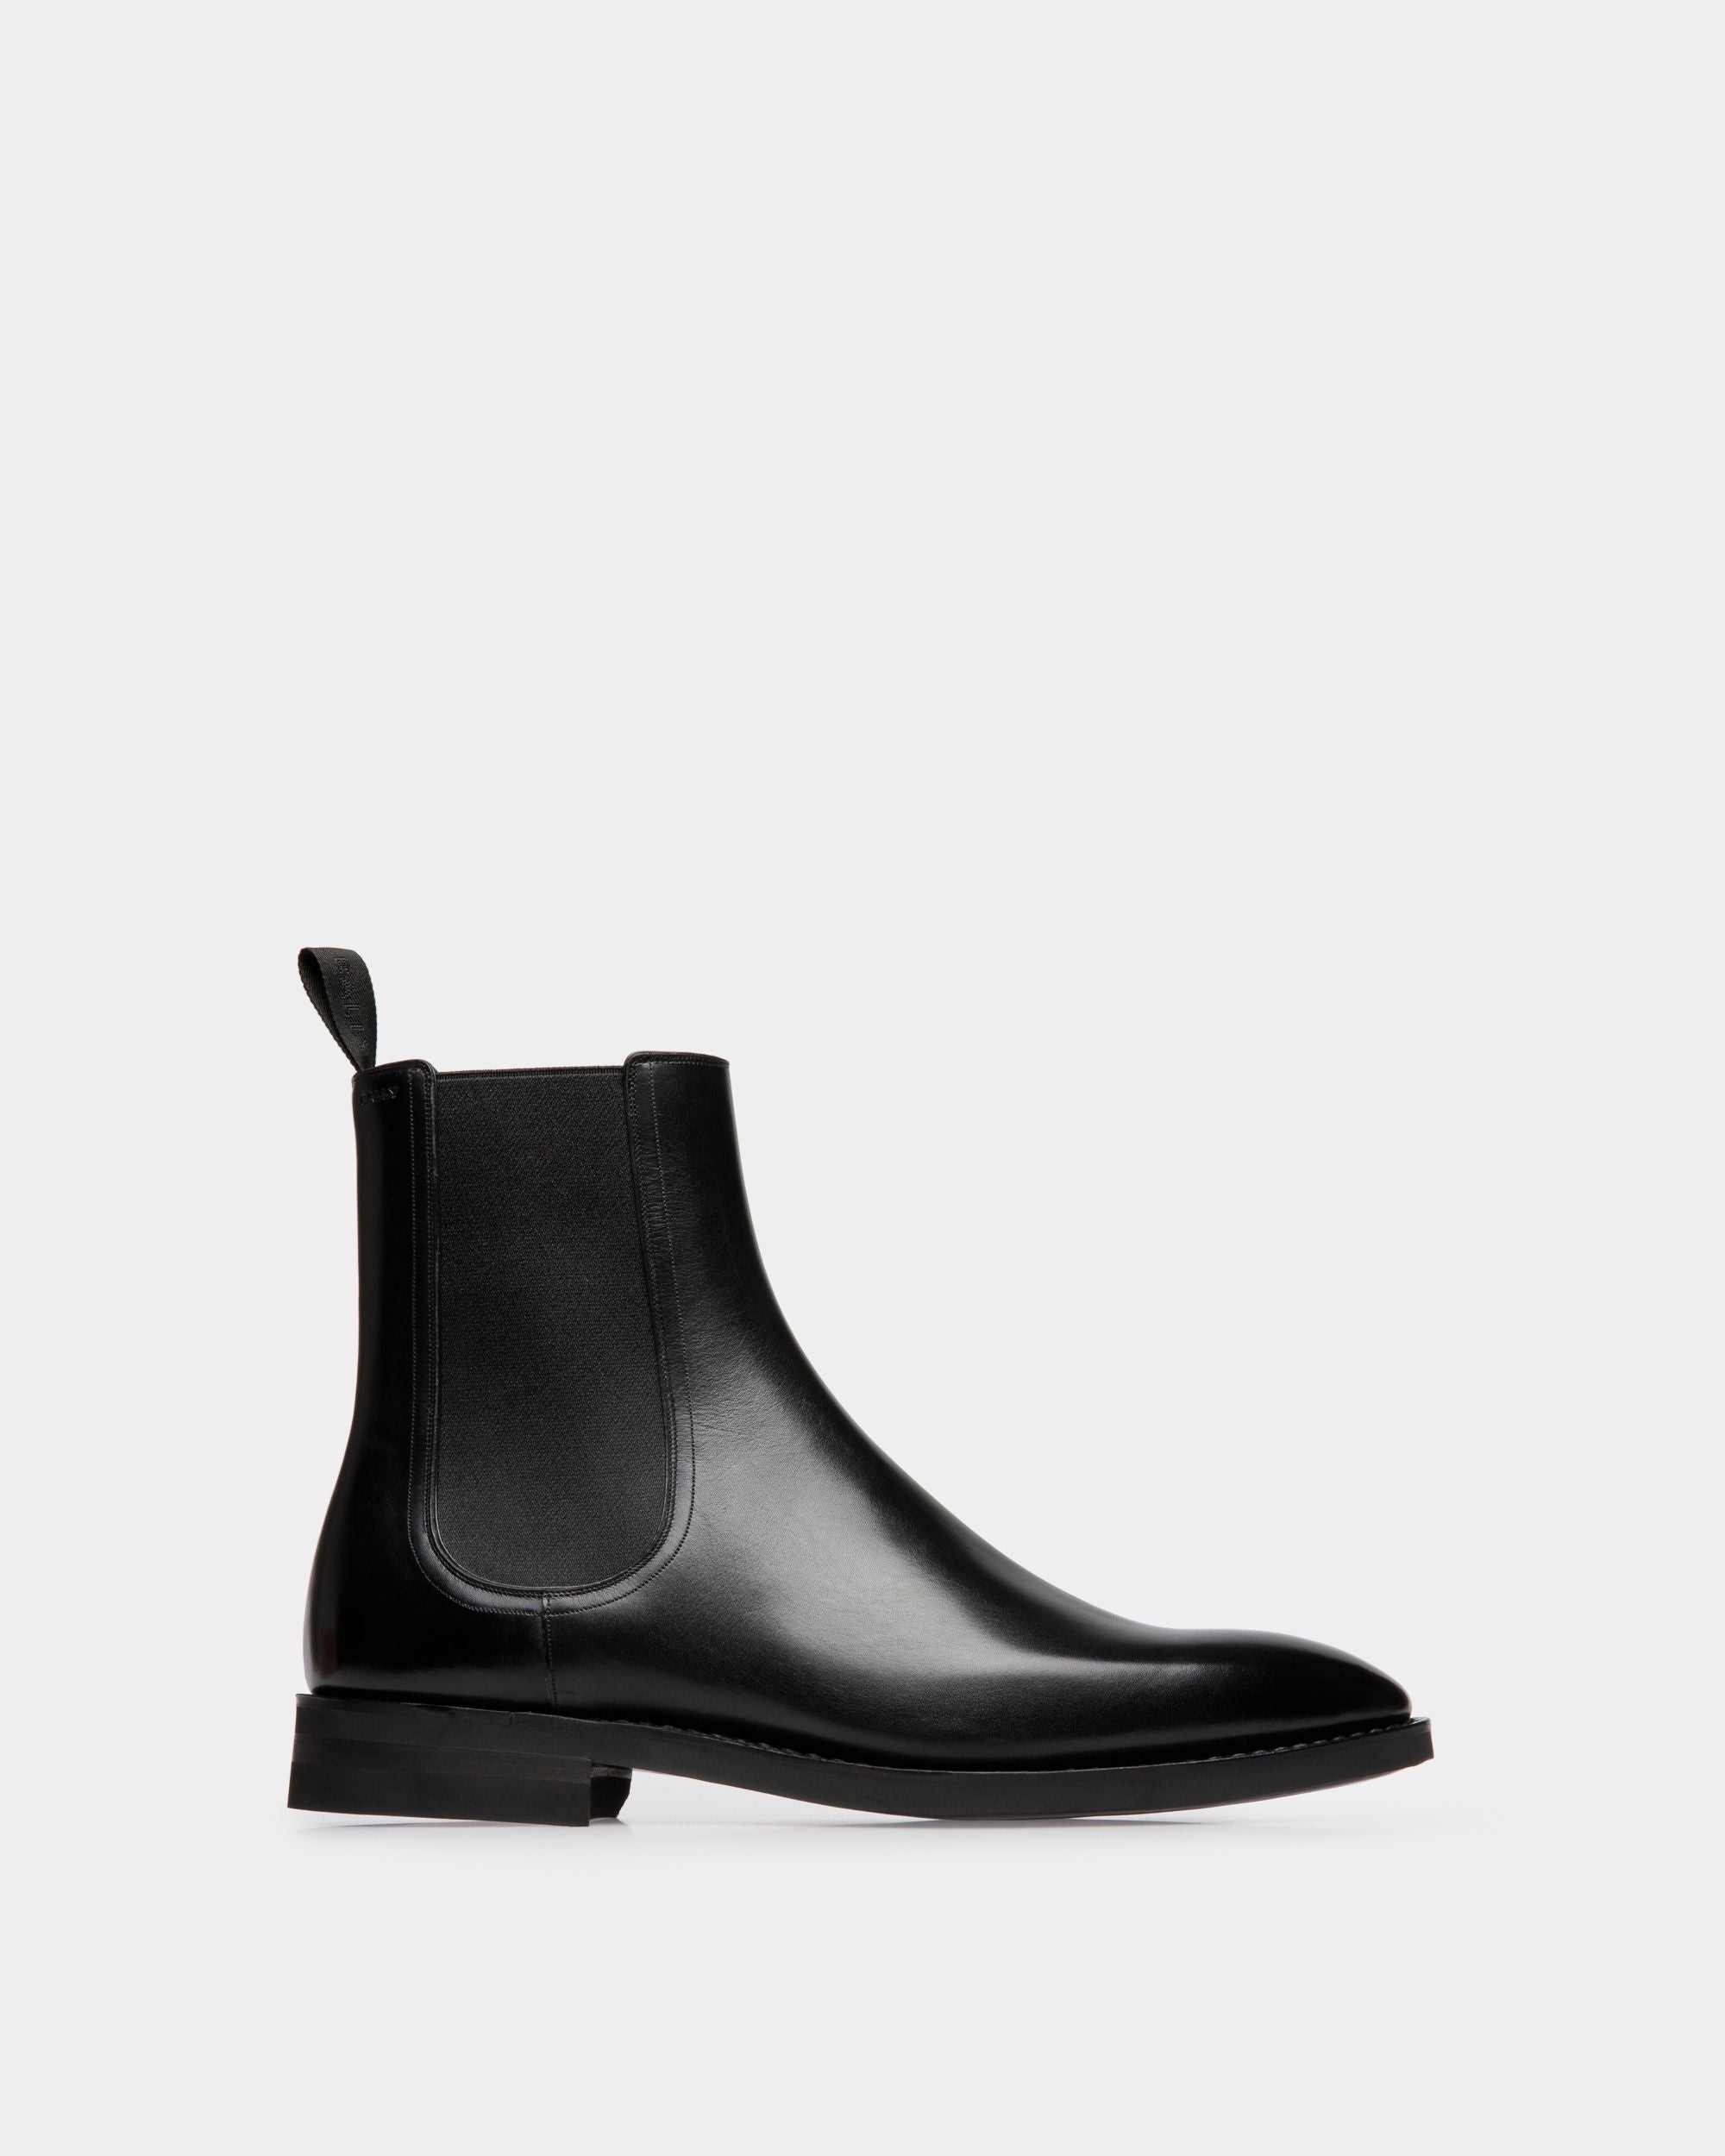 Scribe | Men's Boot in Black Leather | Bally | Still Life Side